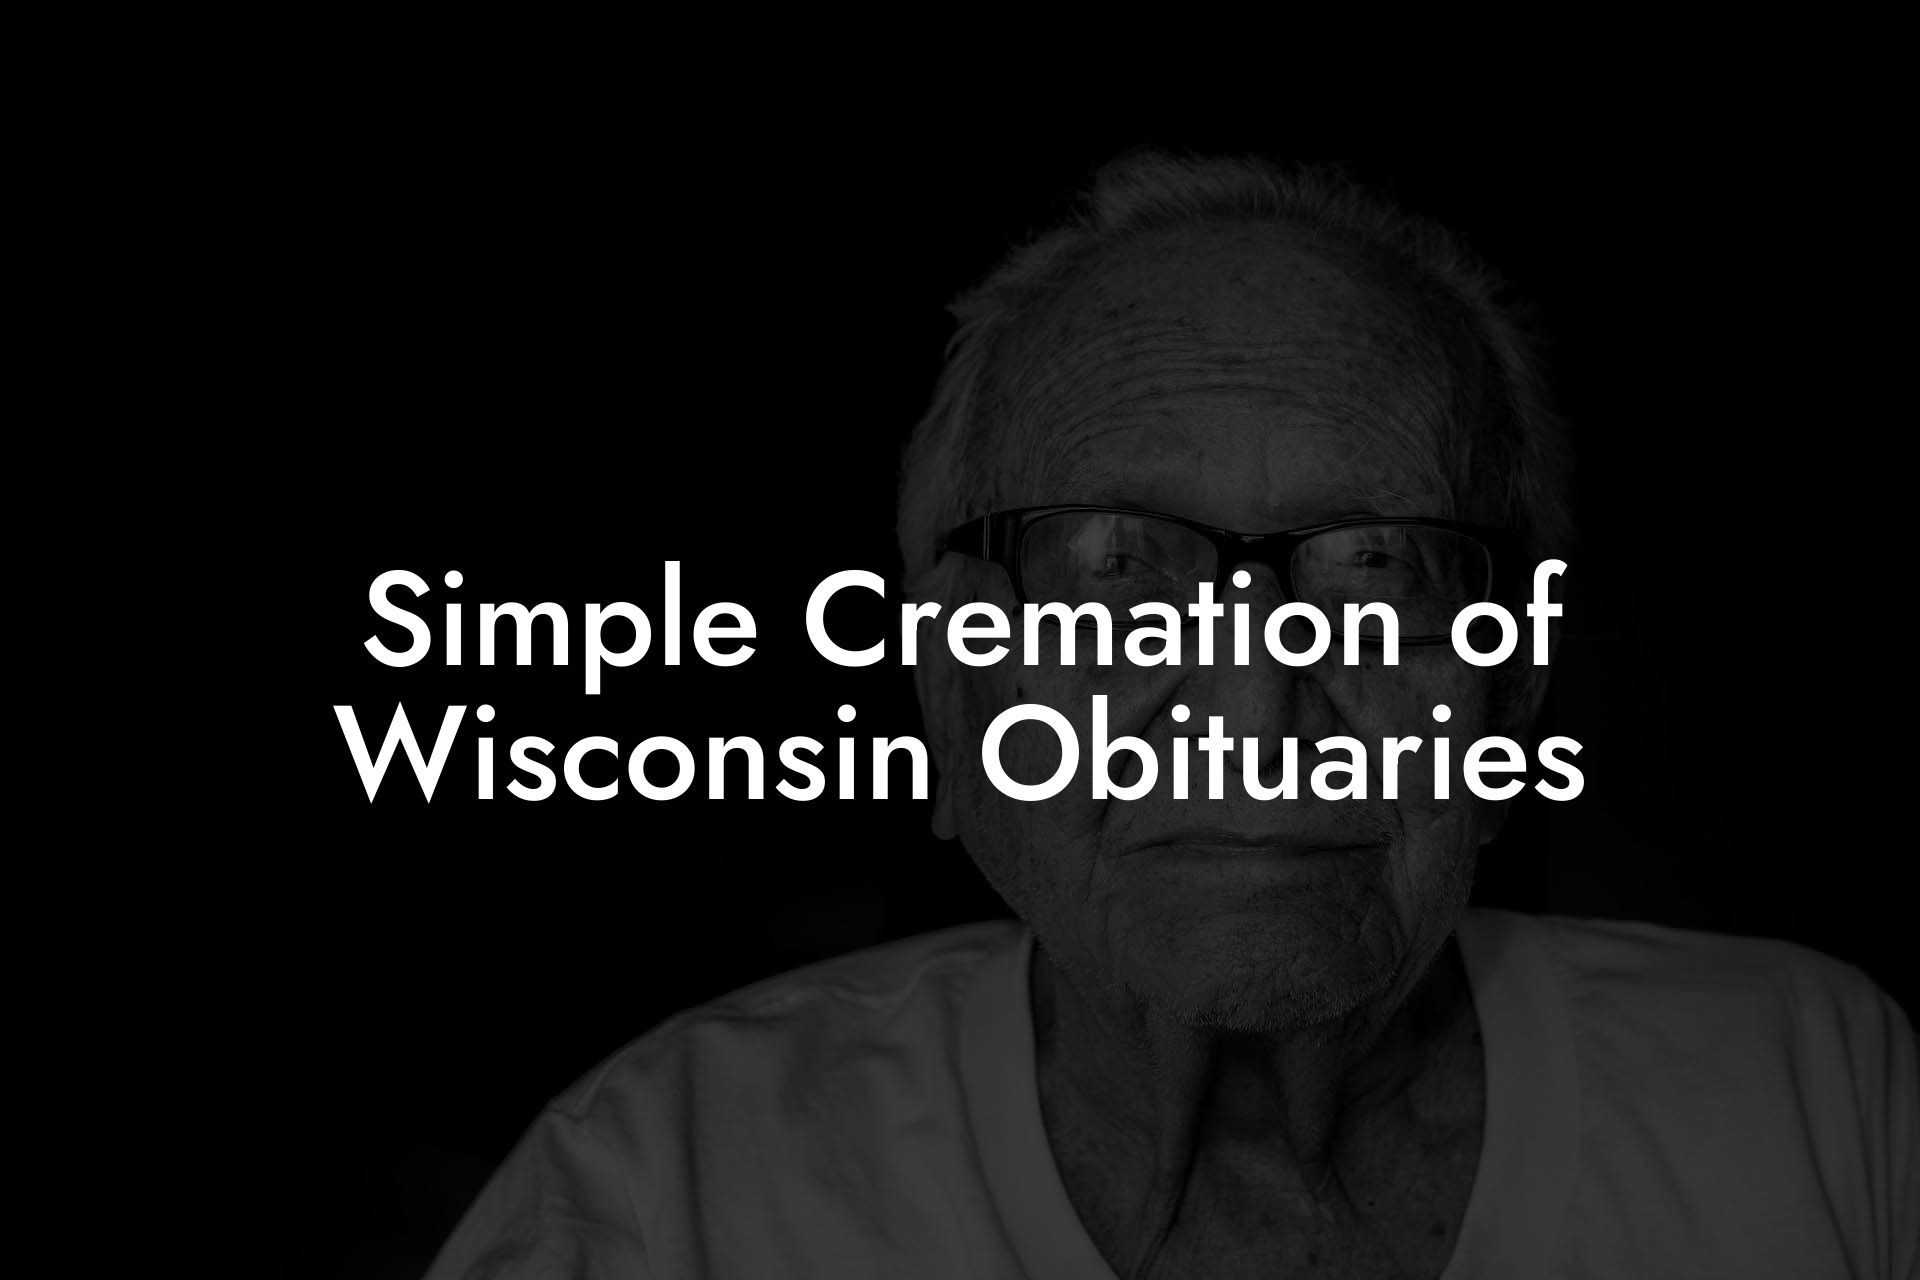 Simple Cremation of Wisconsin Obituaries